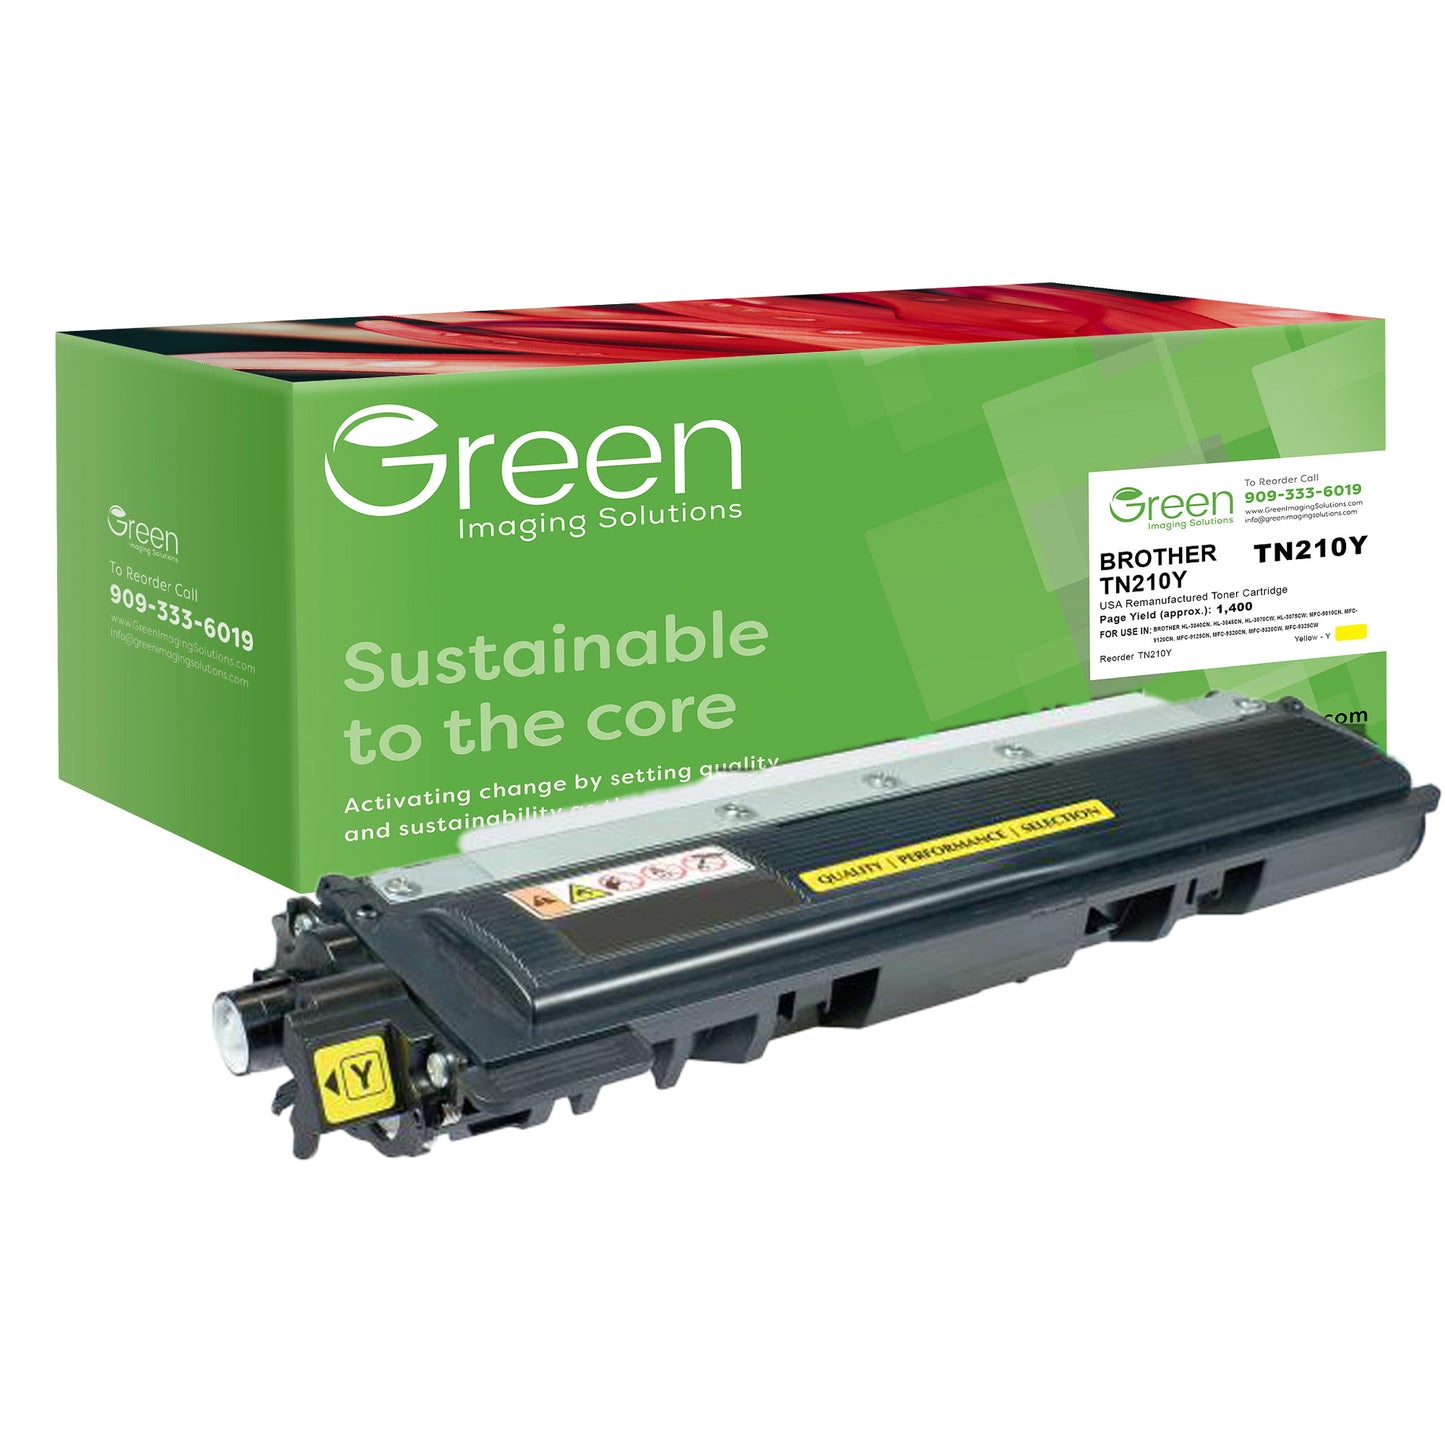 GIS USA Remanufactured Yellow Toner Cartridge for Brother TN210